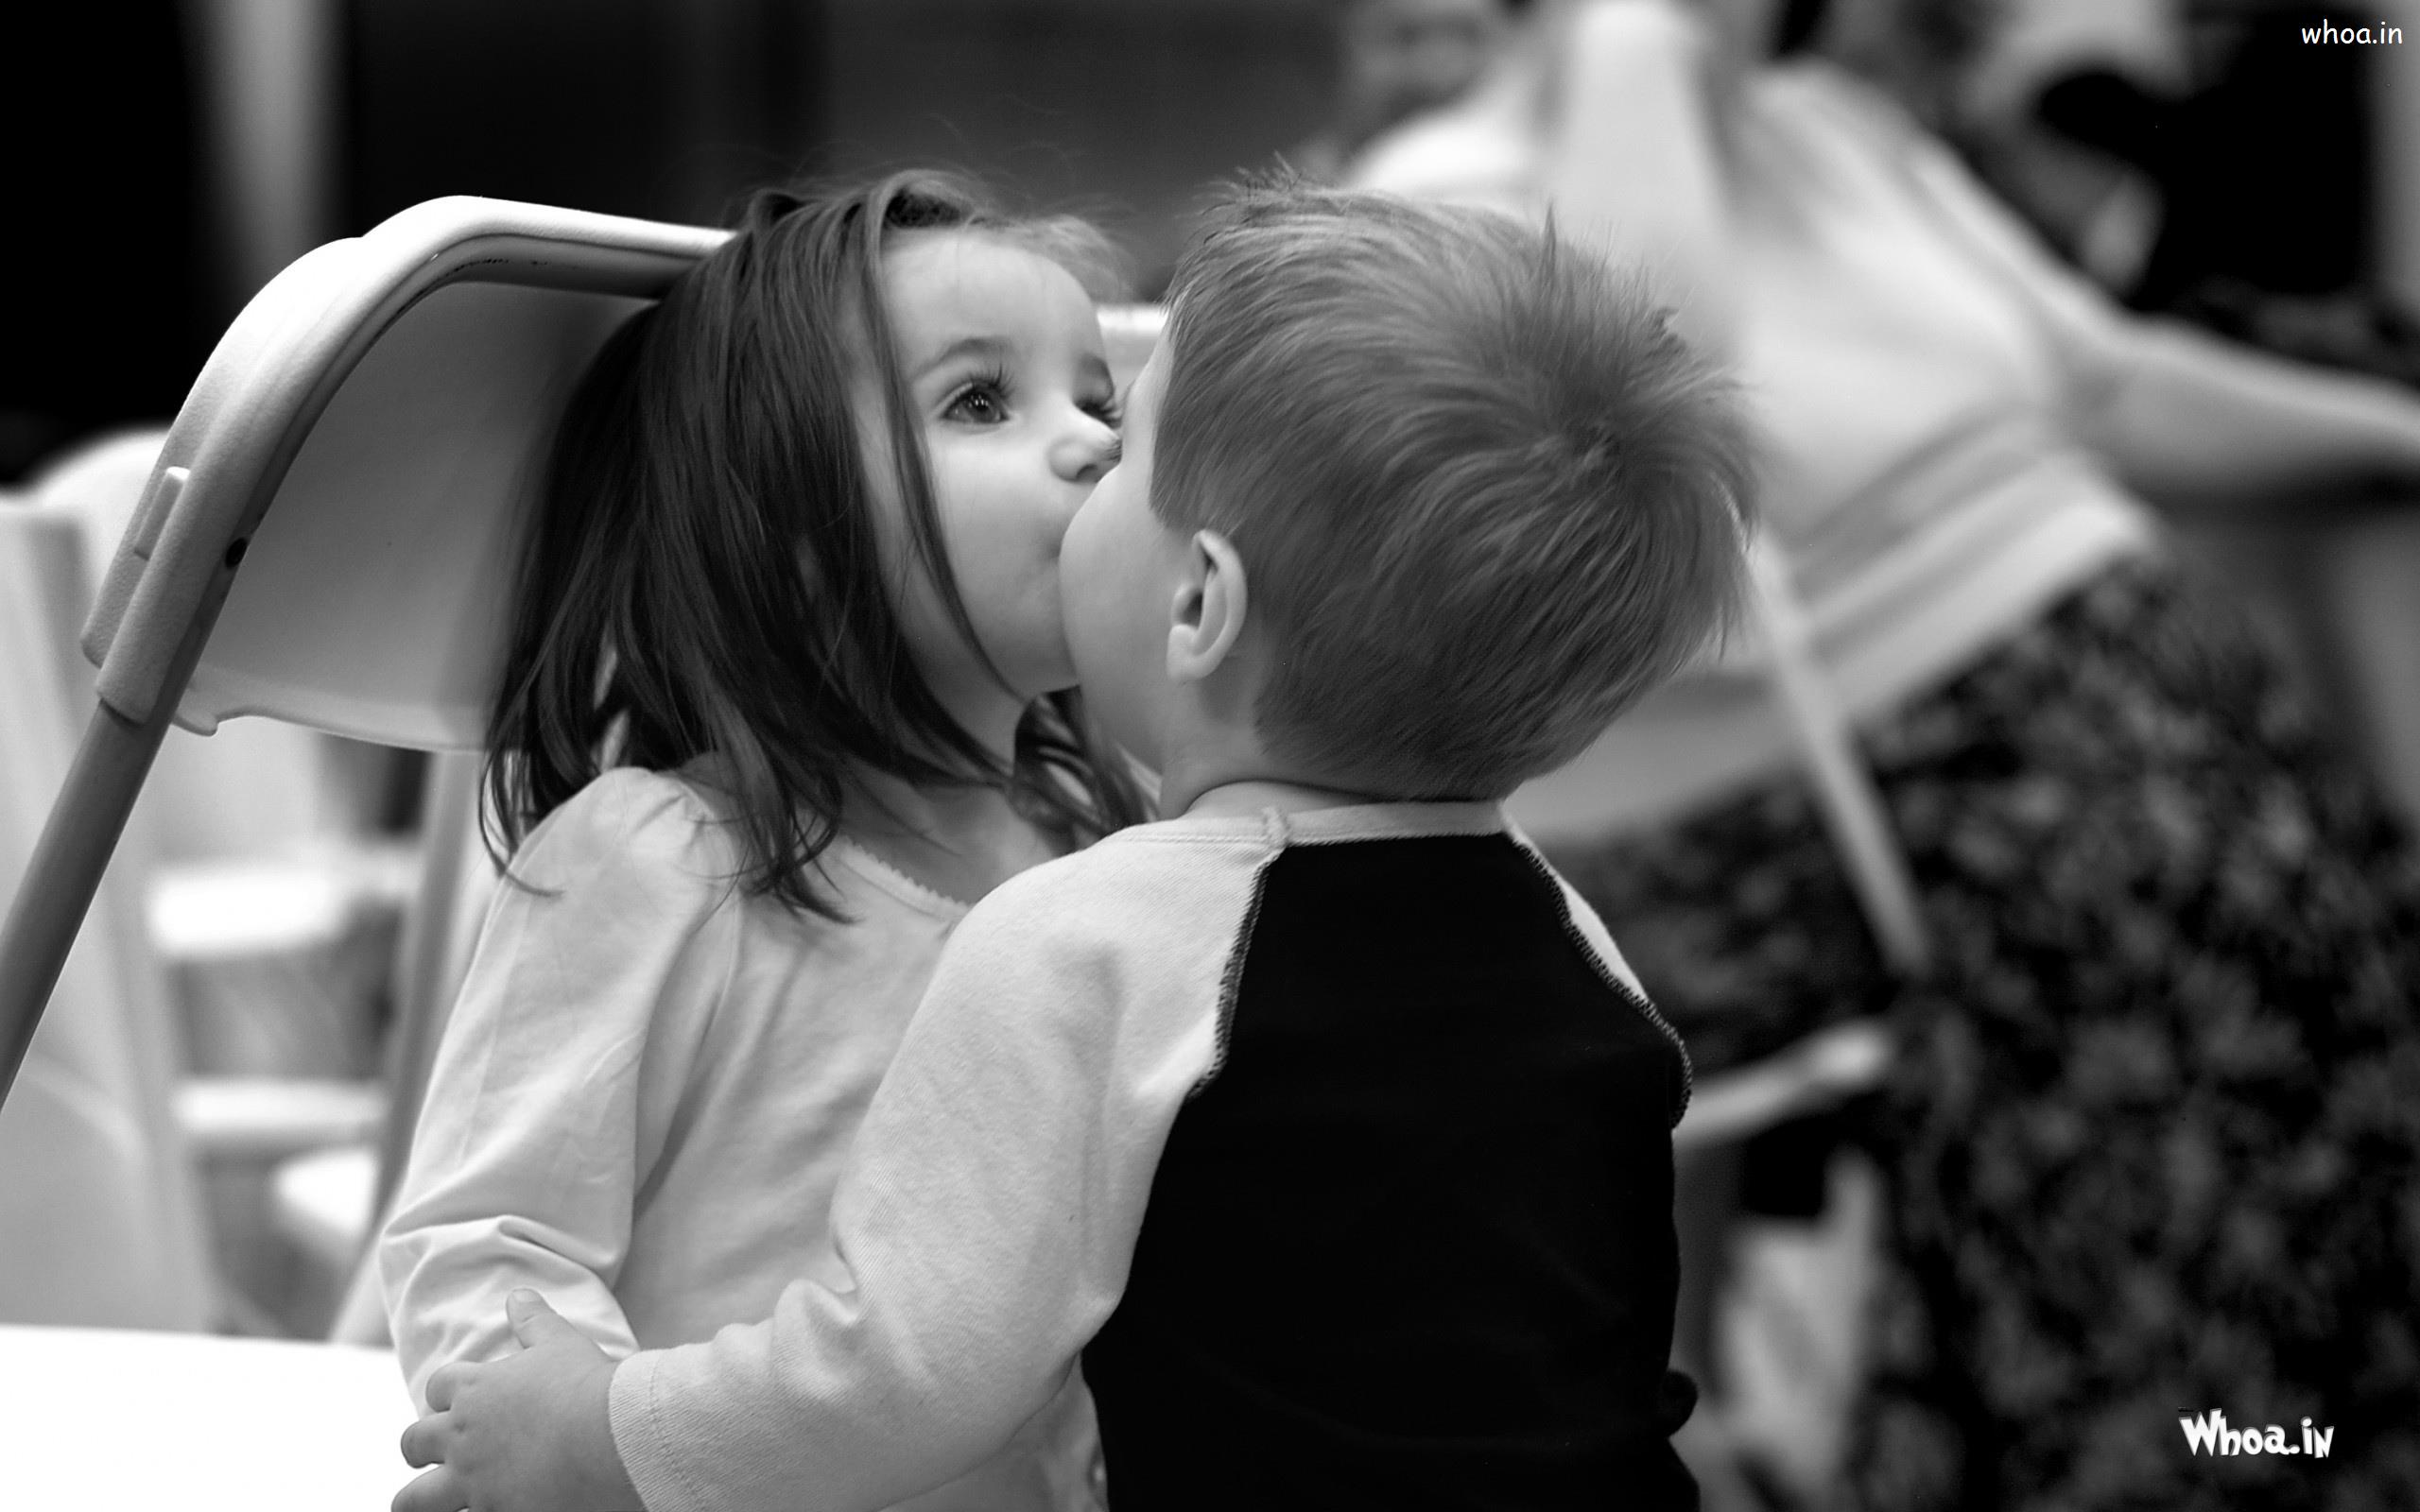 kiss wallpaper,photograph,people,black,black and white,child